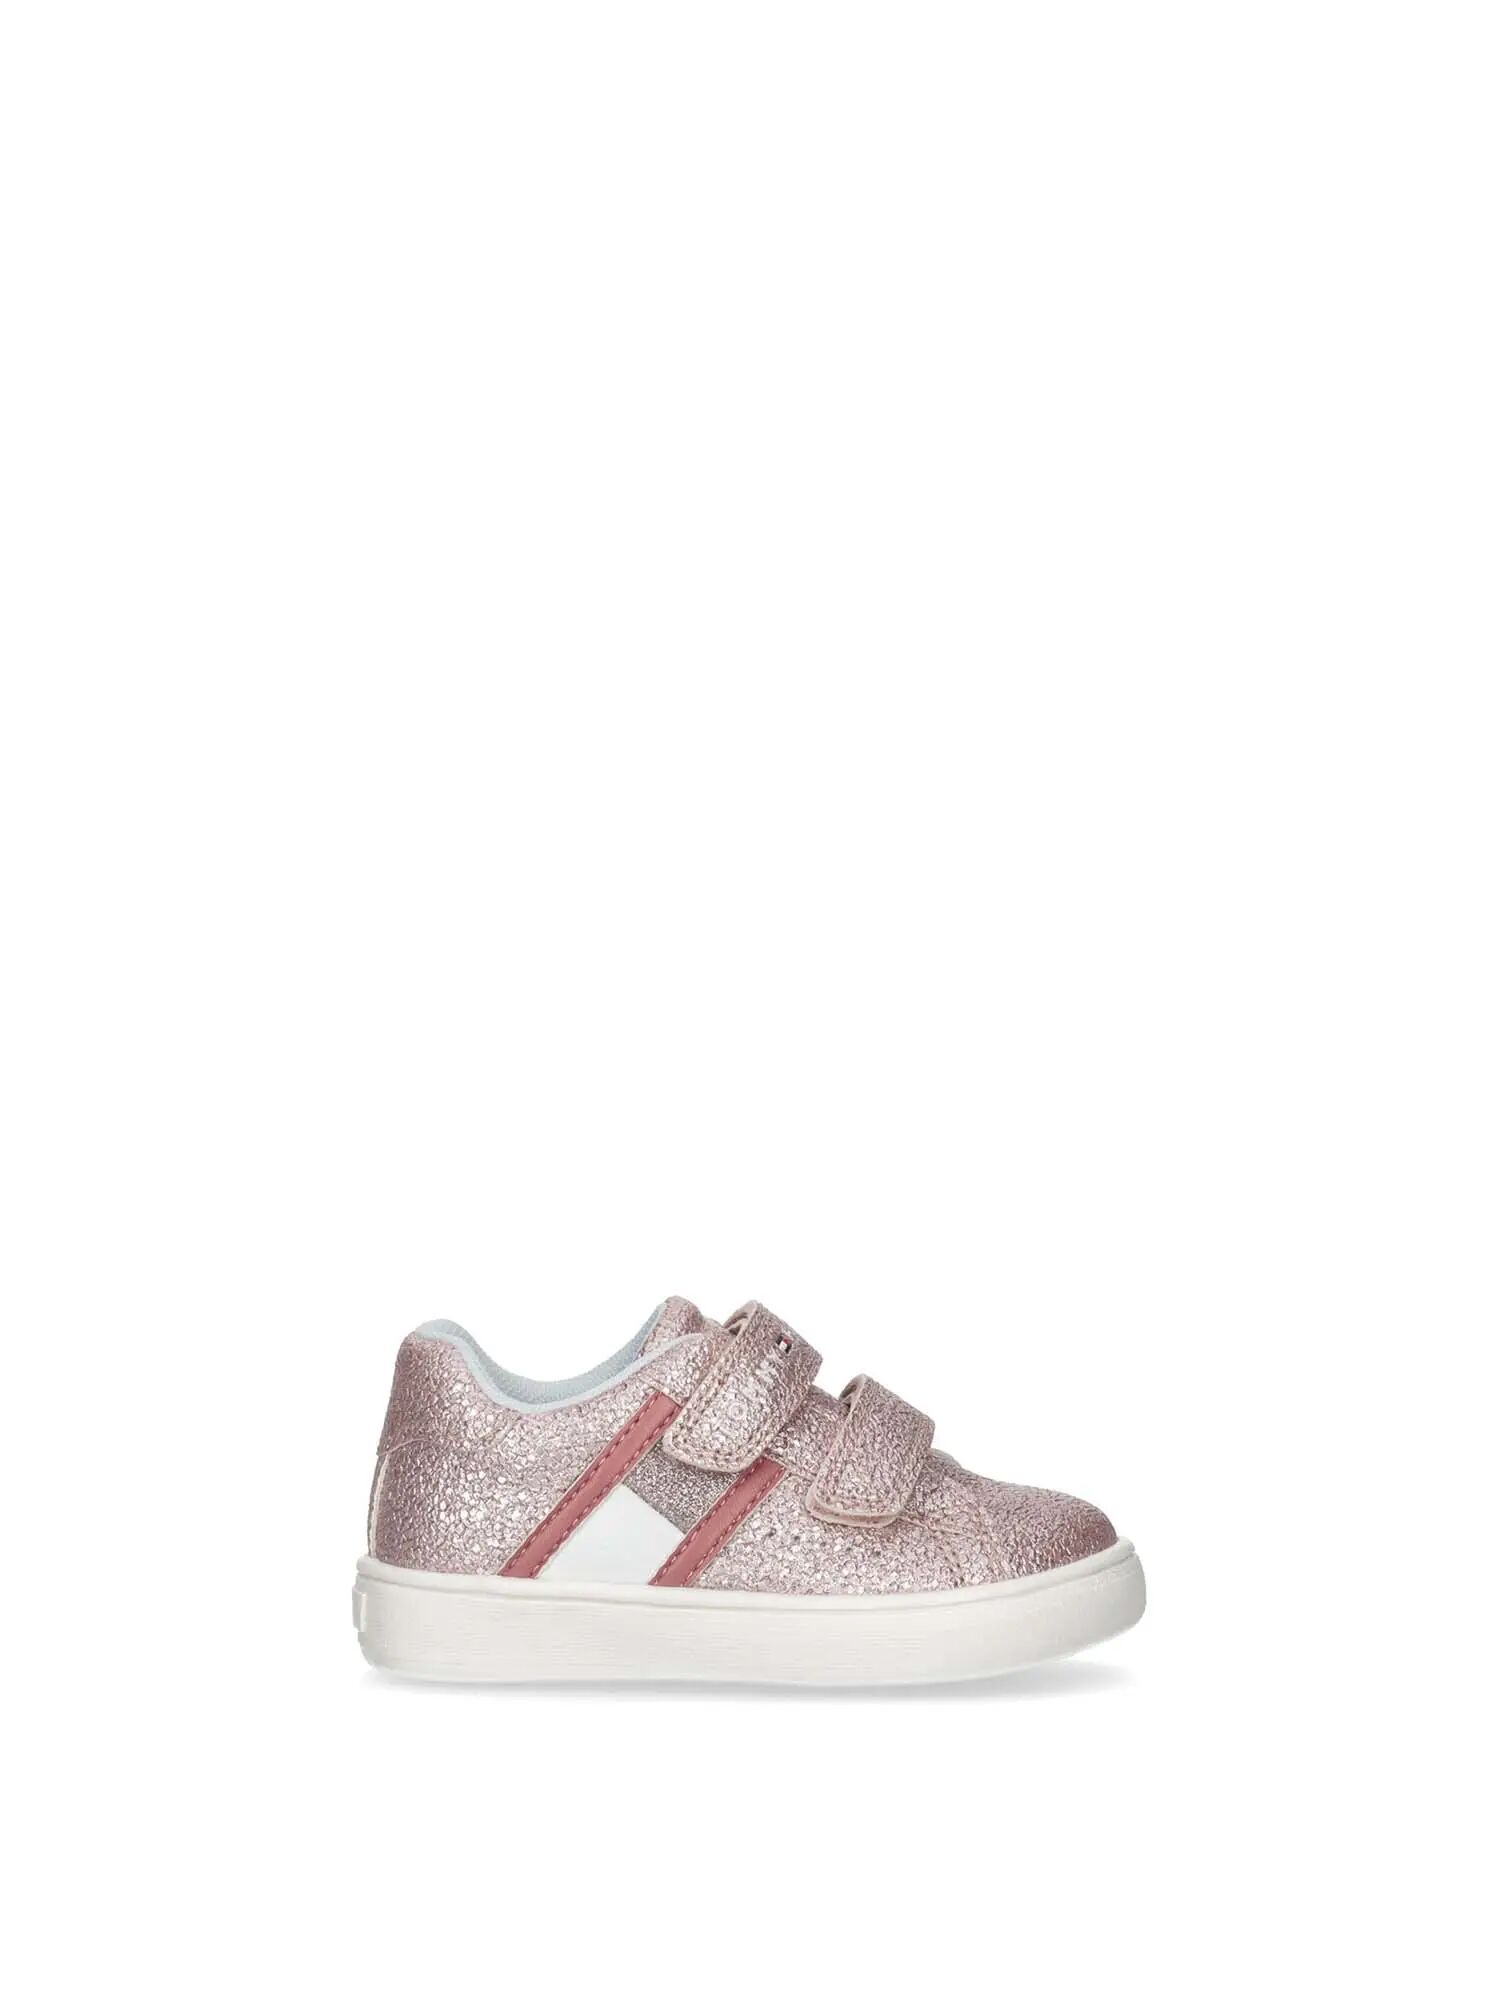 Tommy Hilfiger Sneakers Bambina Colore Rosa ROSA 28